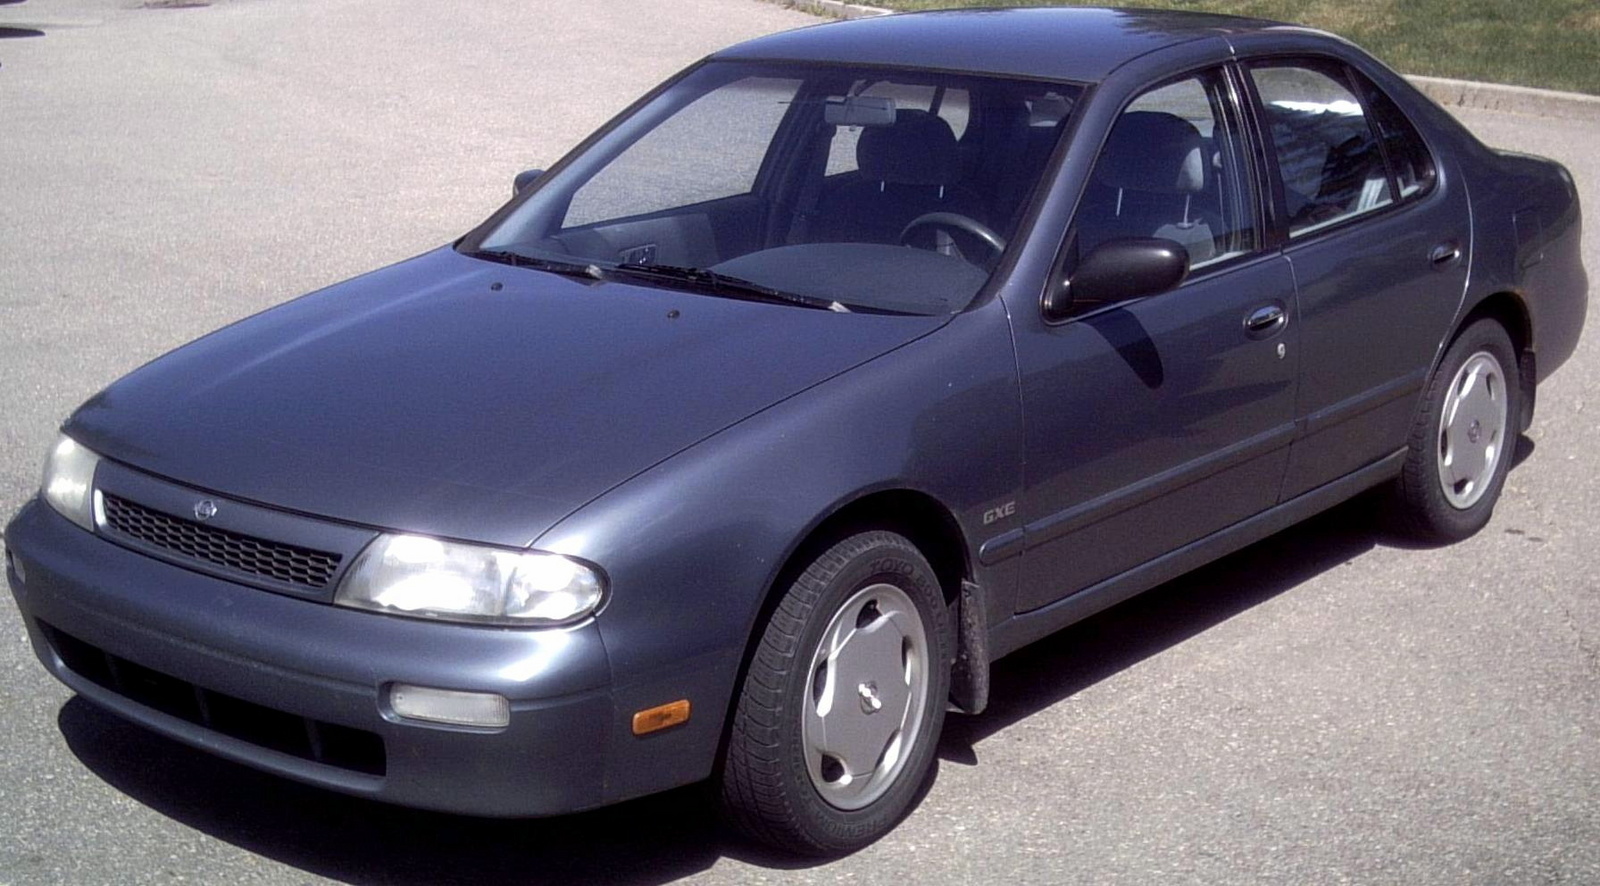 1994 Nissan altima gle review #2